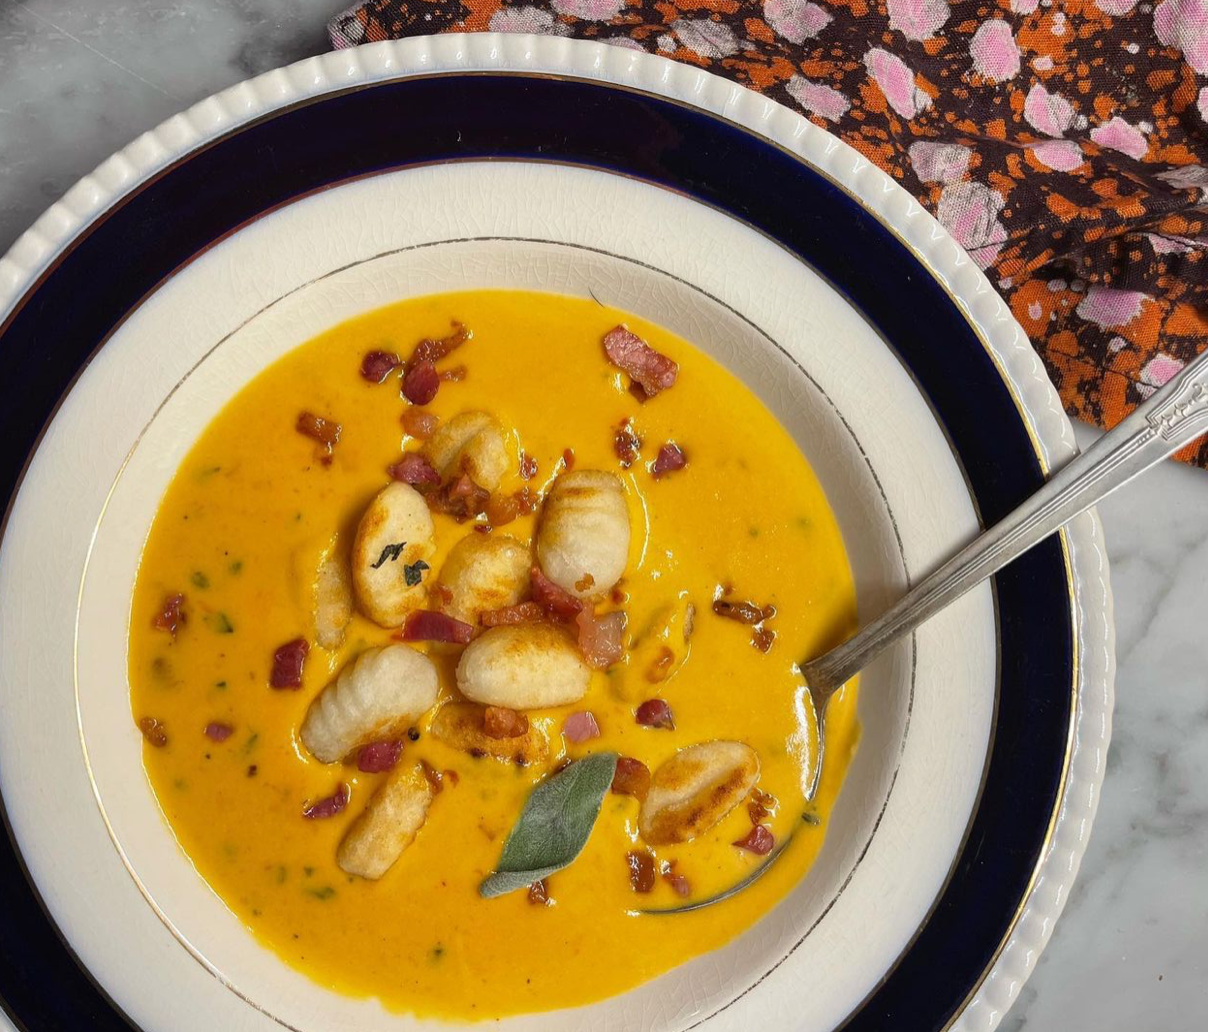 Creamy Roasted Squash Soup with Gnocchi Croutons & Pancetta